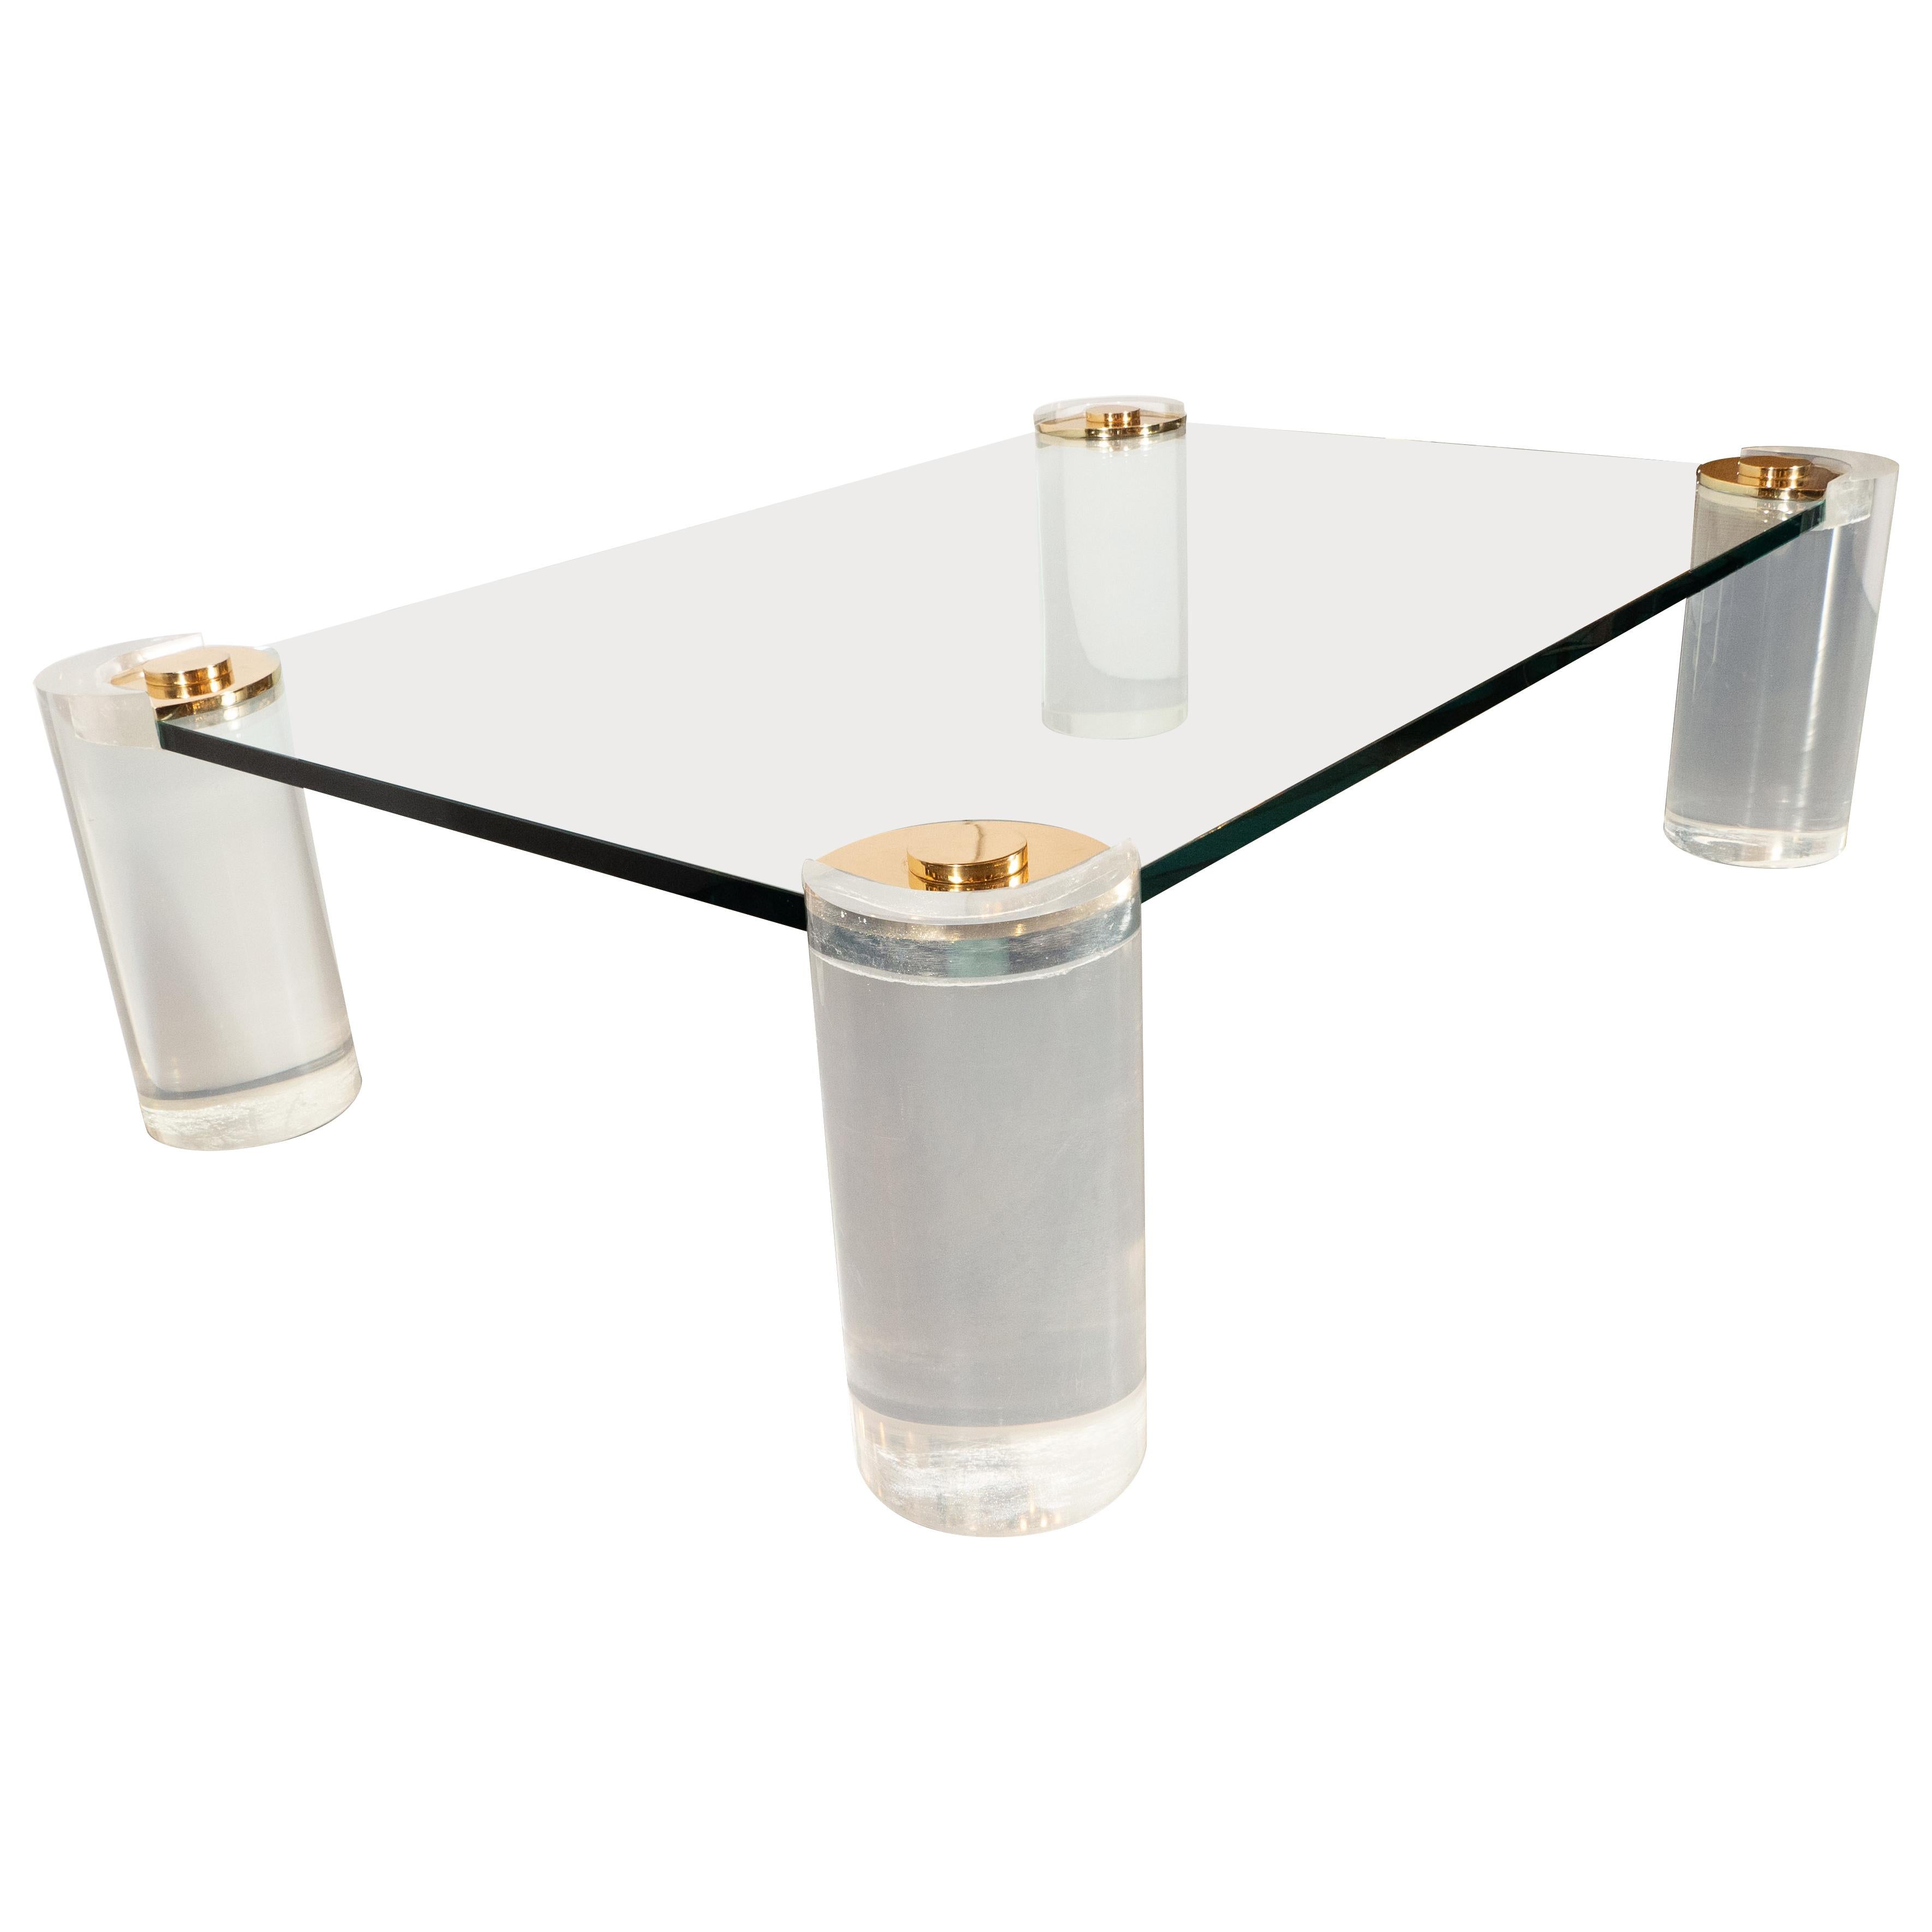 Late 20th Century Karl Springer Documented Mid-Century Modern Lucite, Brass & Glass Cocktail Table